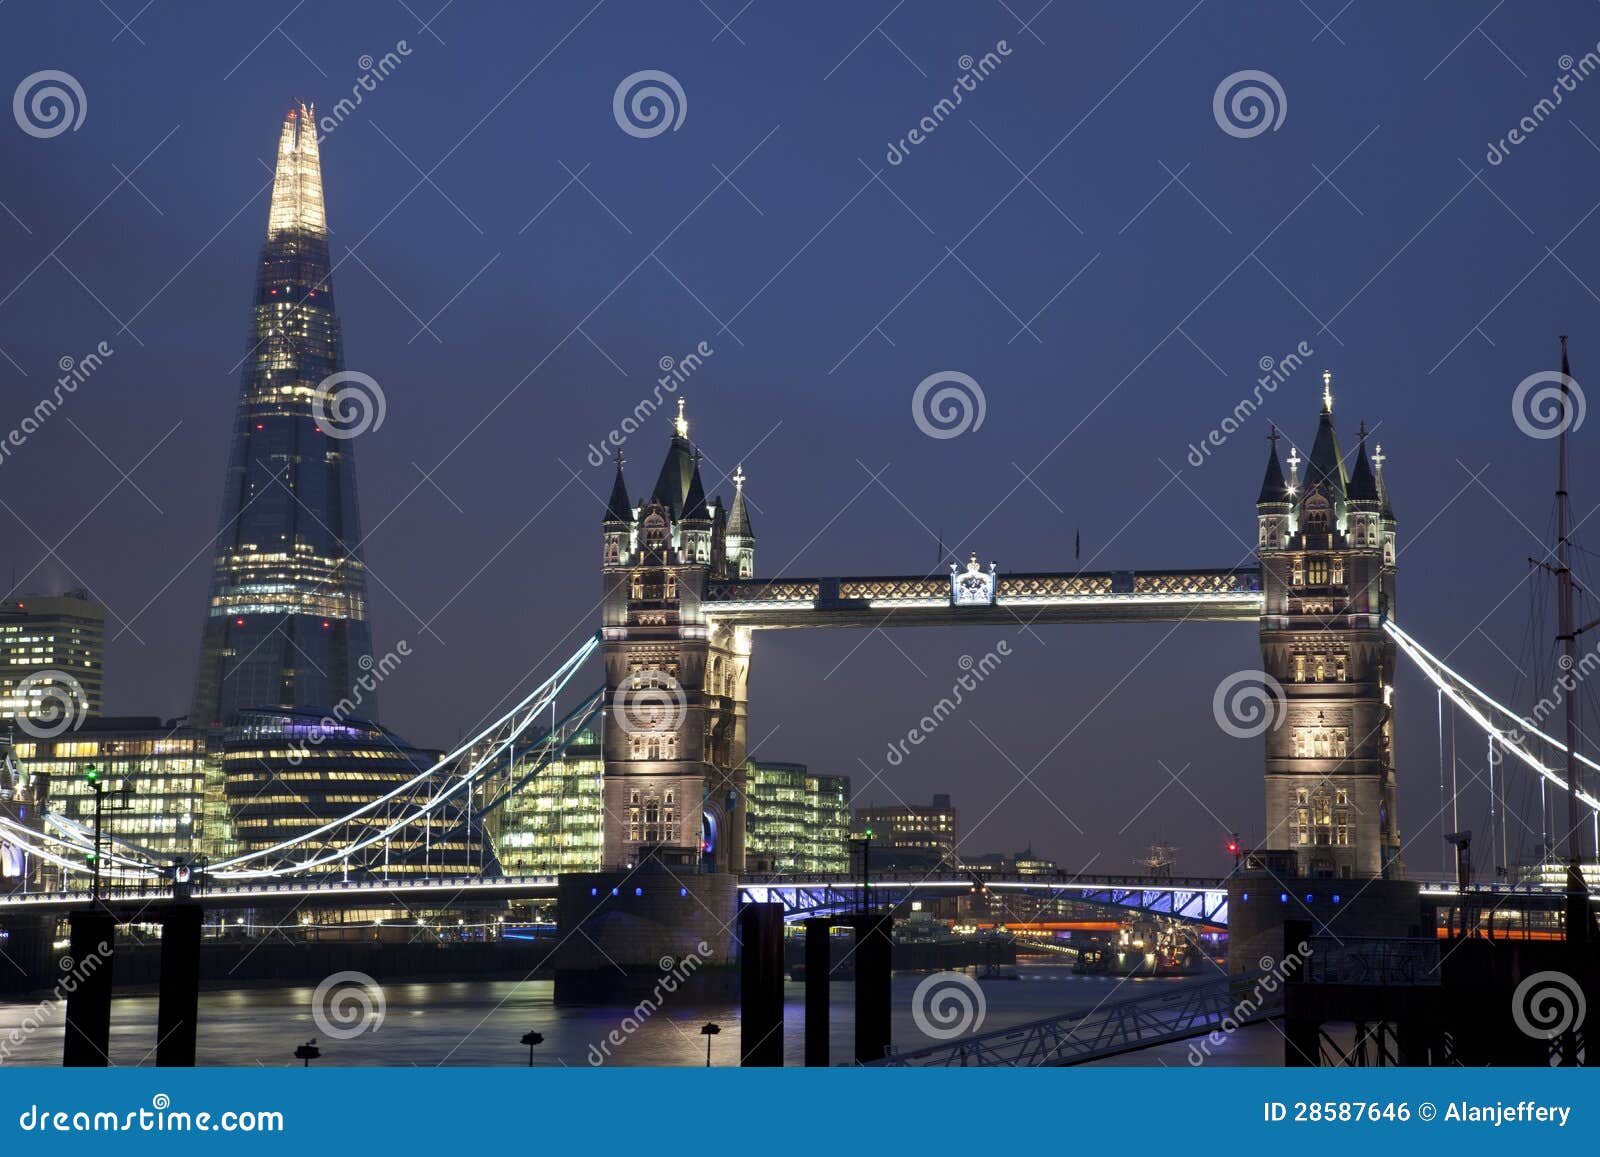 tower bridge and the shard in london at night